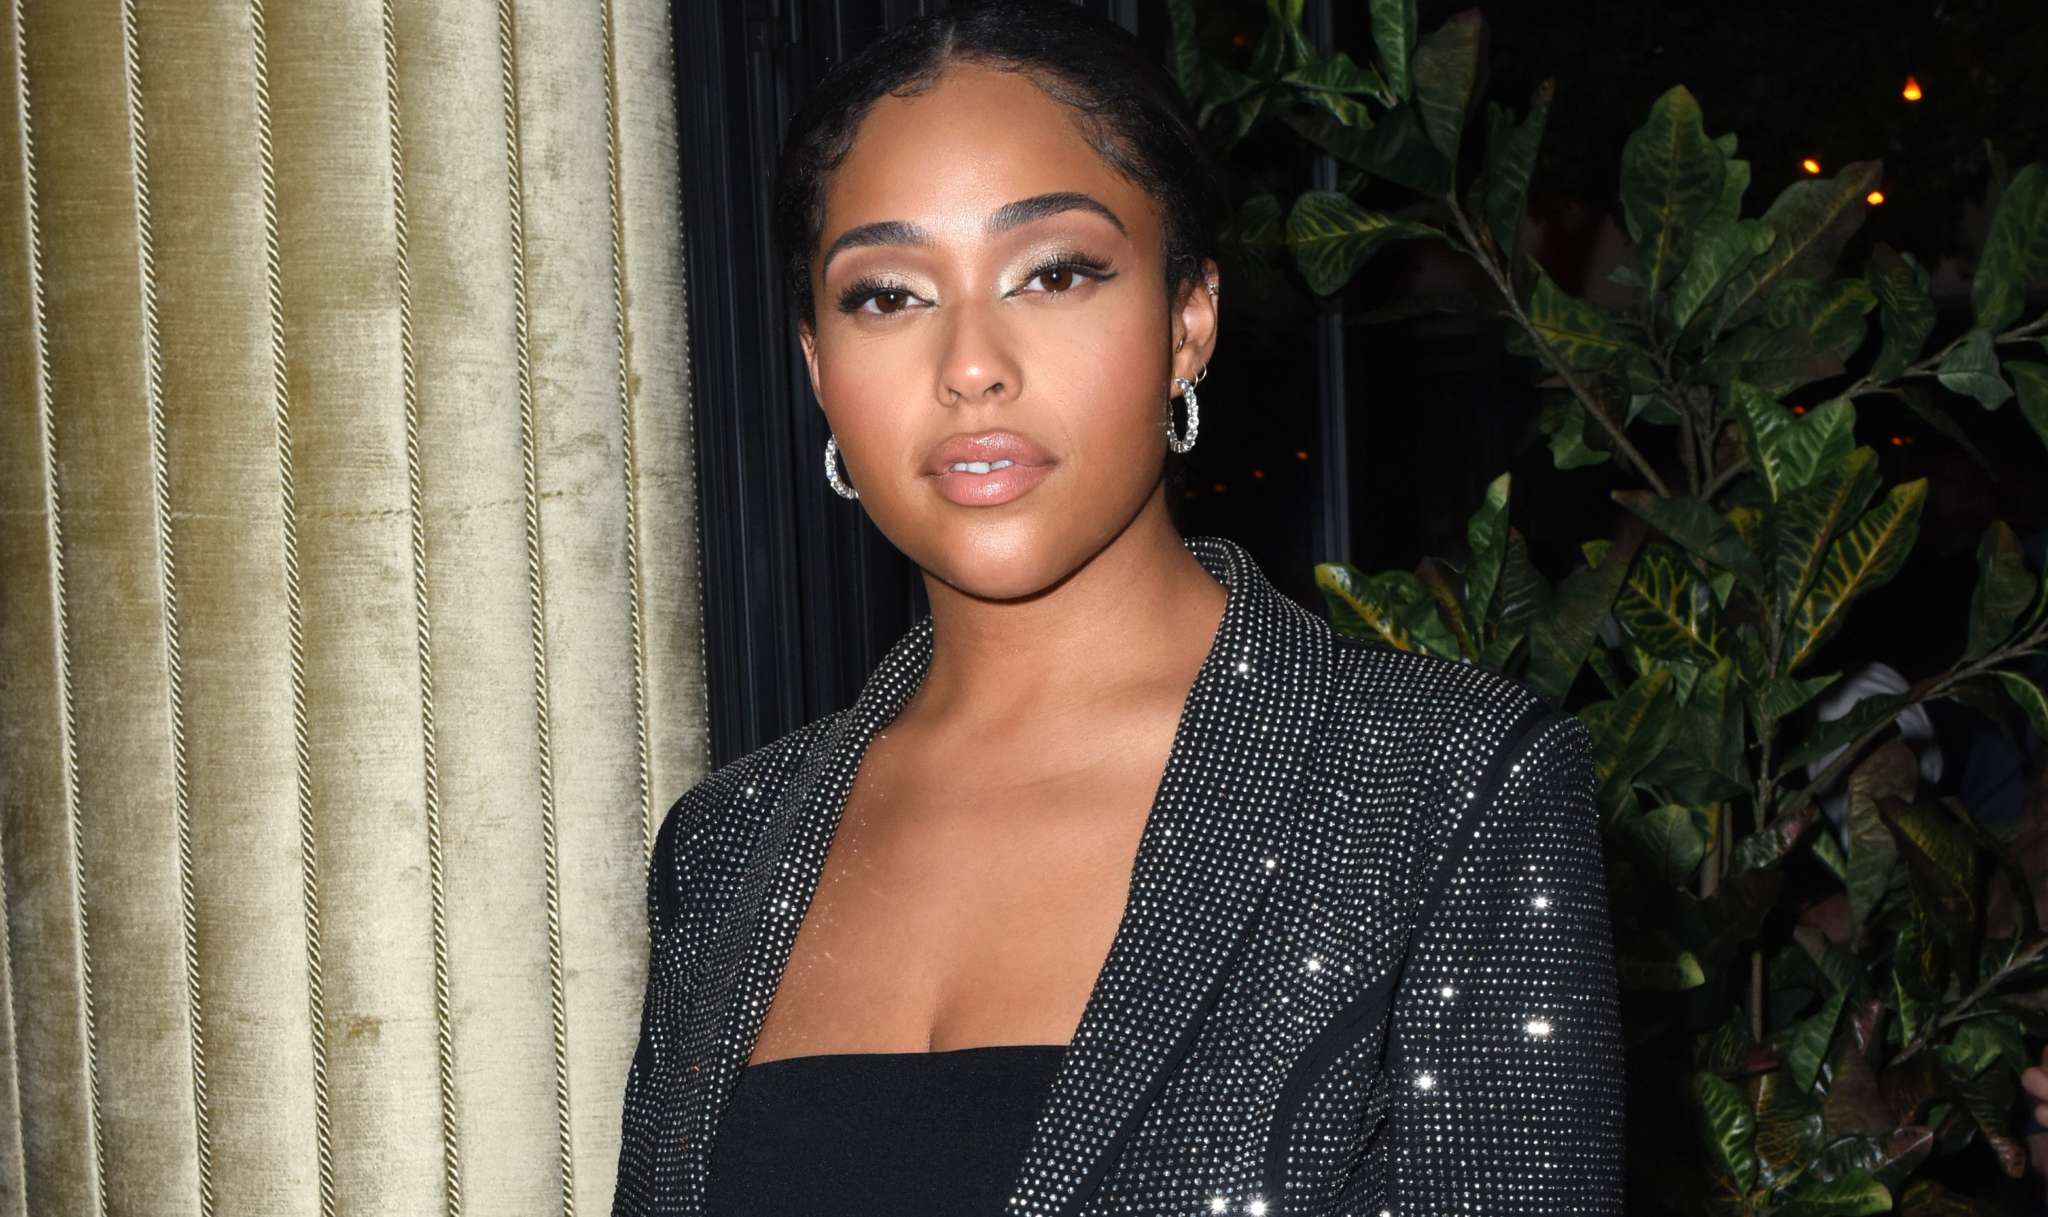 Jordyn Woods Rocks Her Curves In This Pink Skin-Tight Dress - Fans Ask For A Beauty Line